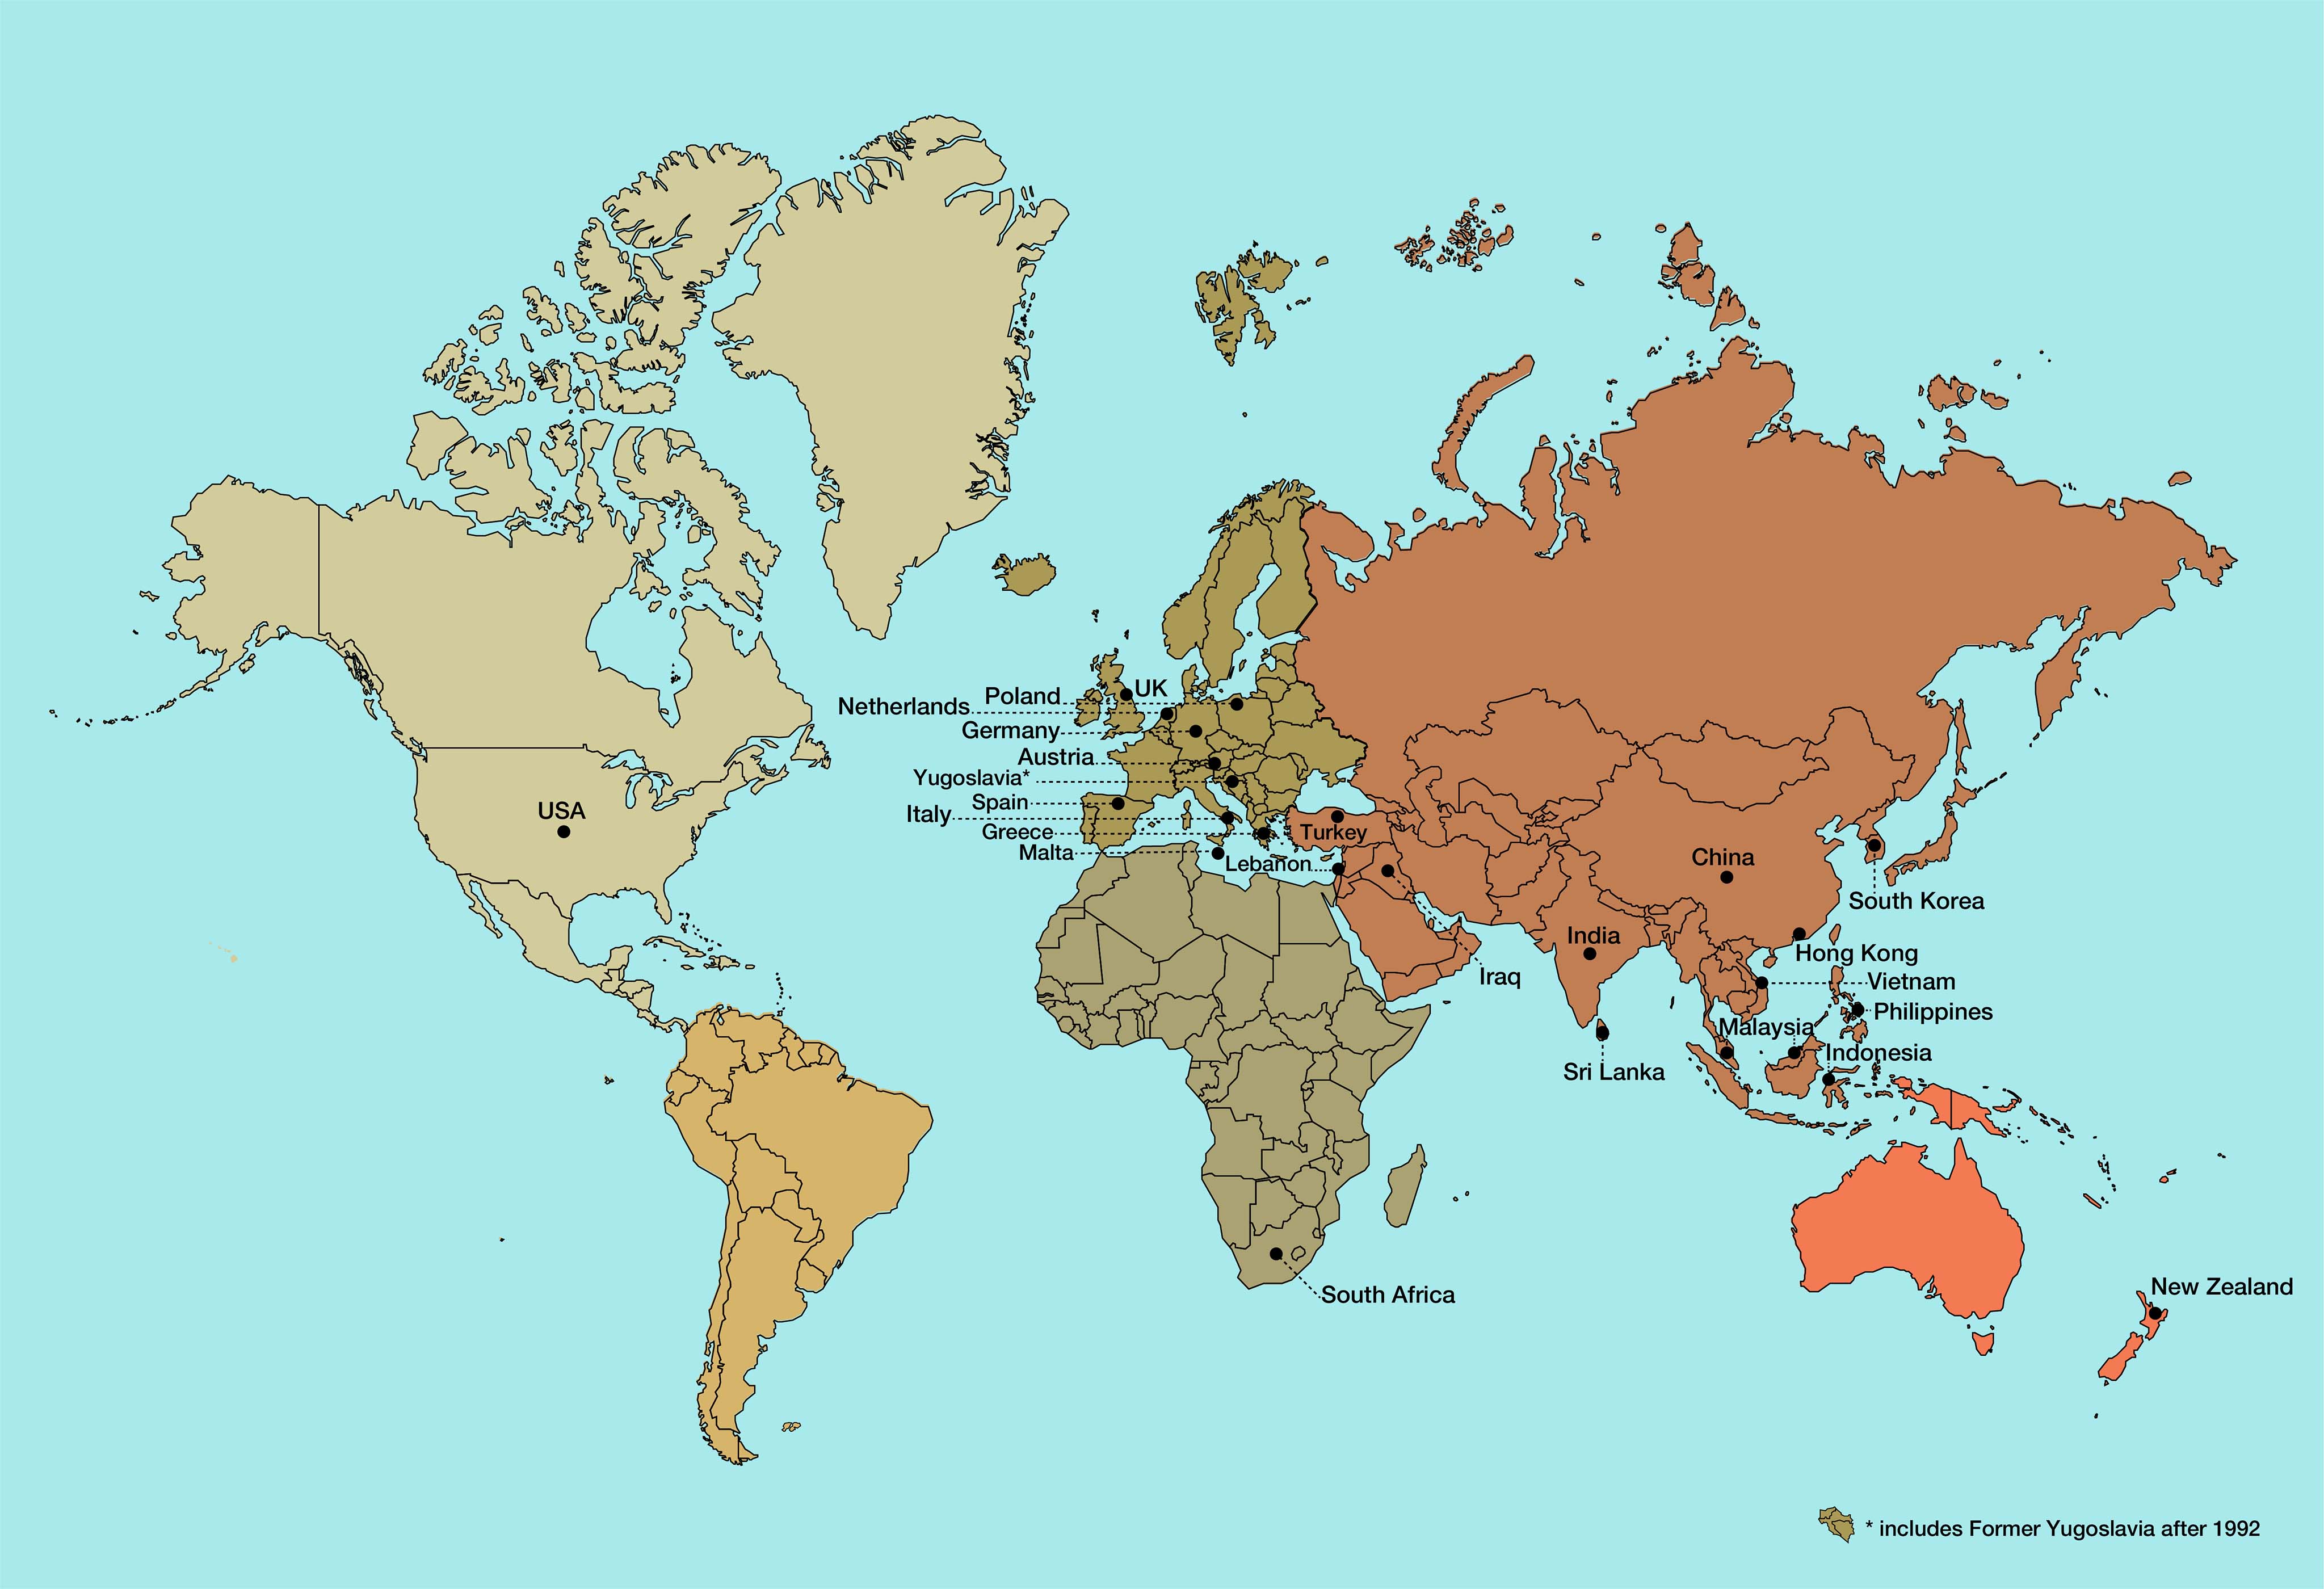 Map showing countries that are major providers of migrants to Australia.